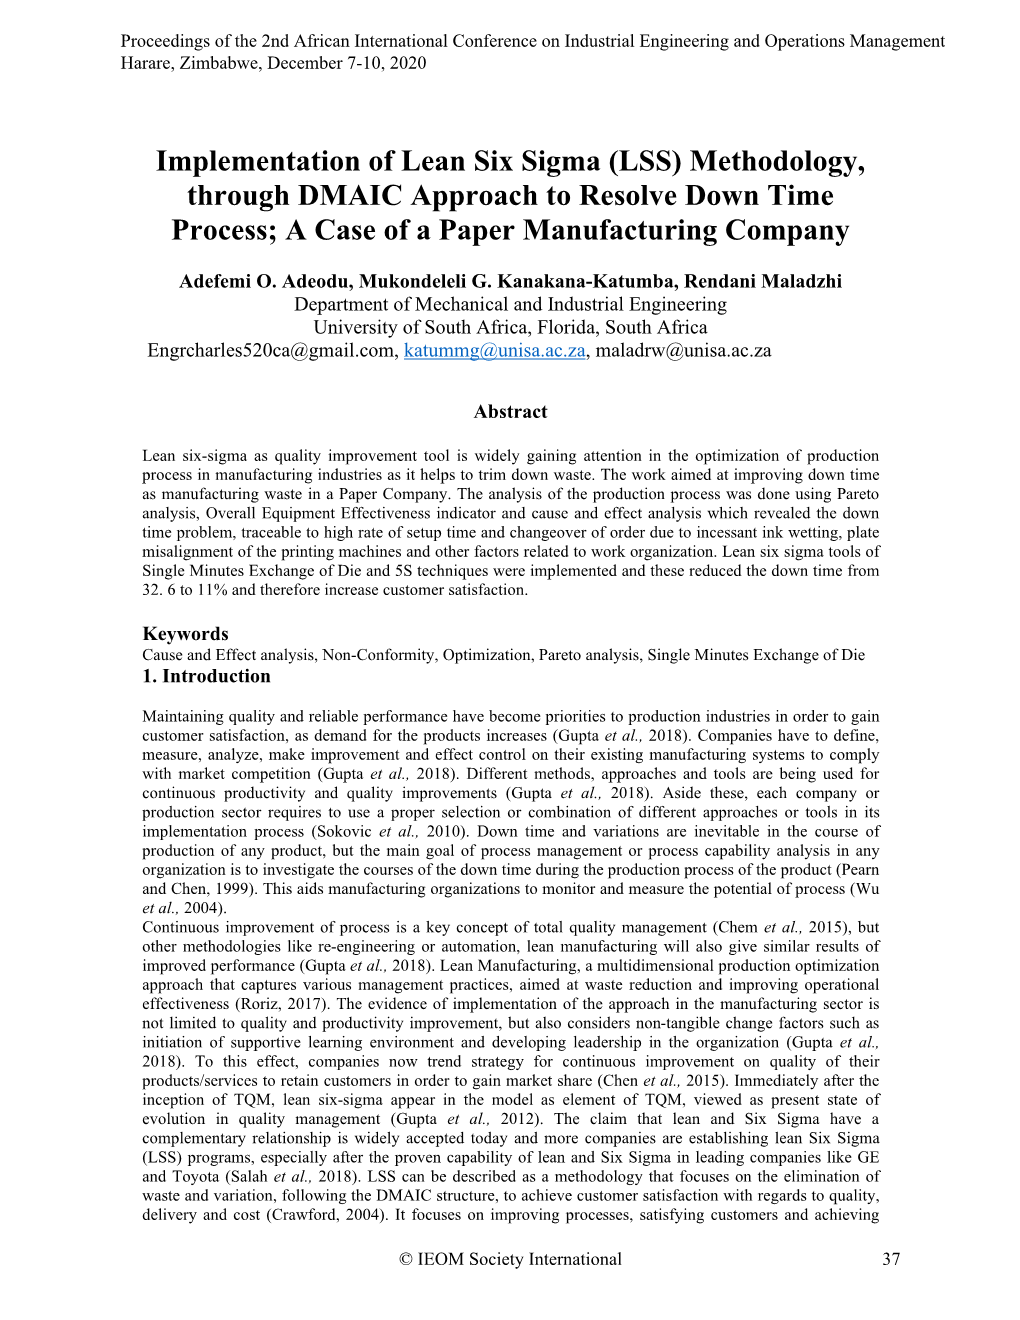 Implementation of Lean Six Sigma (LSS) Methodology, Through DMAIC Approach to Resolve Down Time Process; a Case of a Paper Manufacturing Company